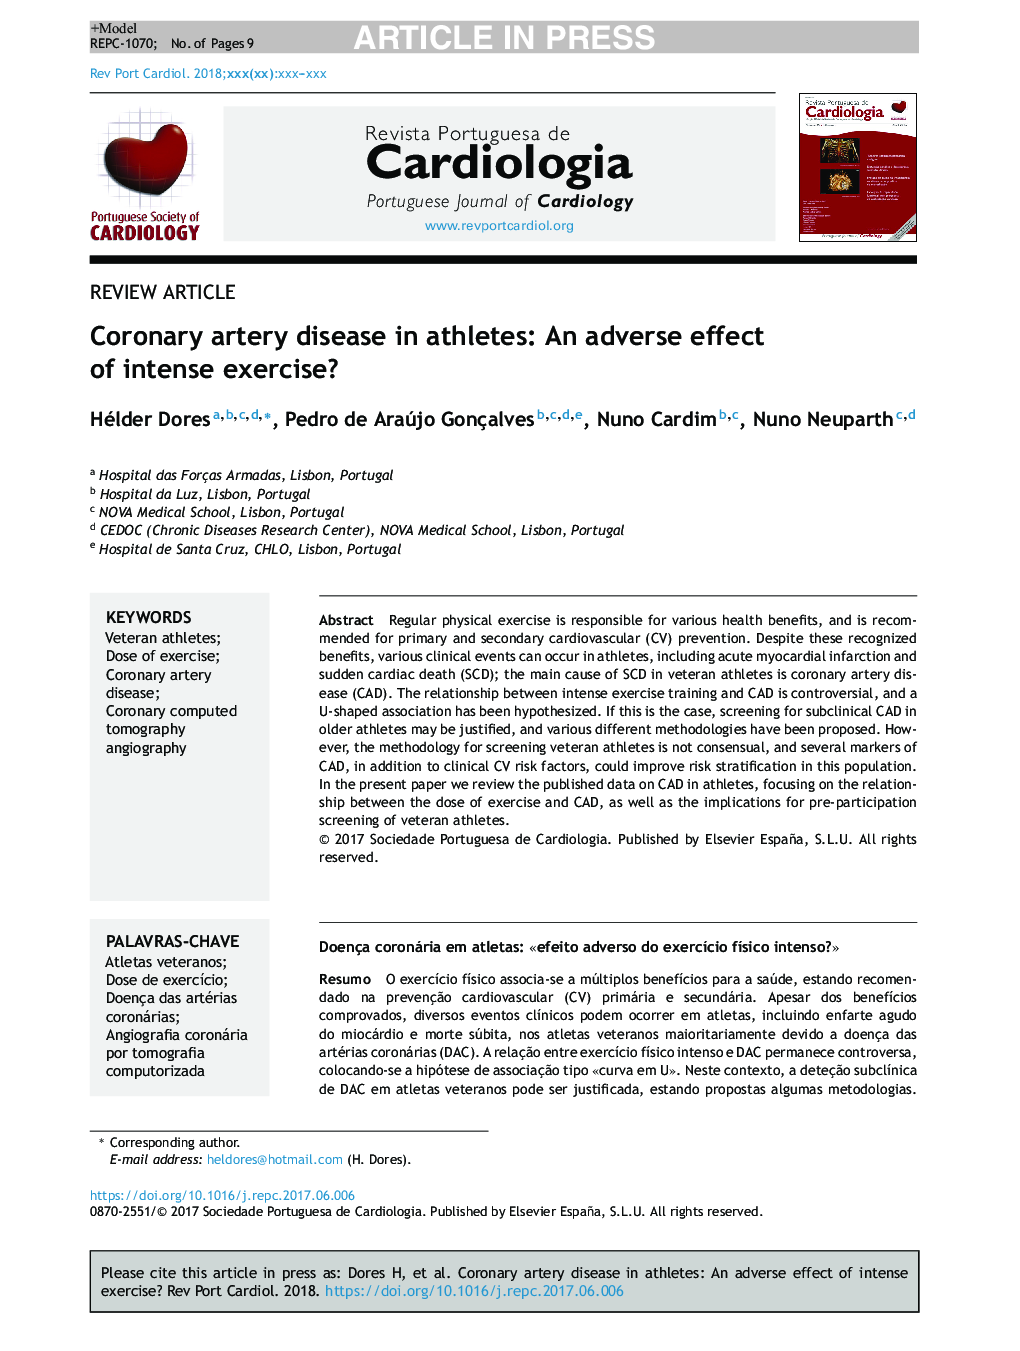 Coronary artery disease in athletes: An adverse effect of intense exercise?